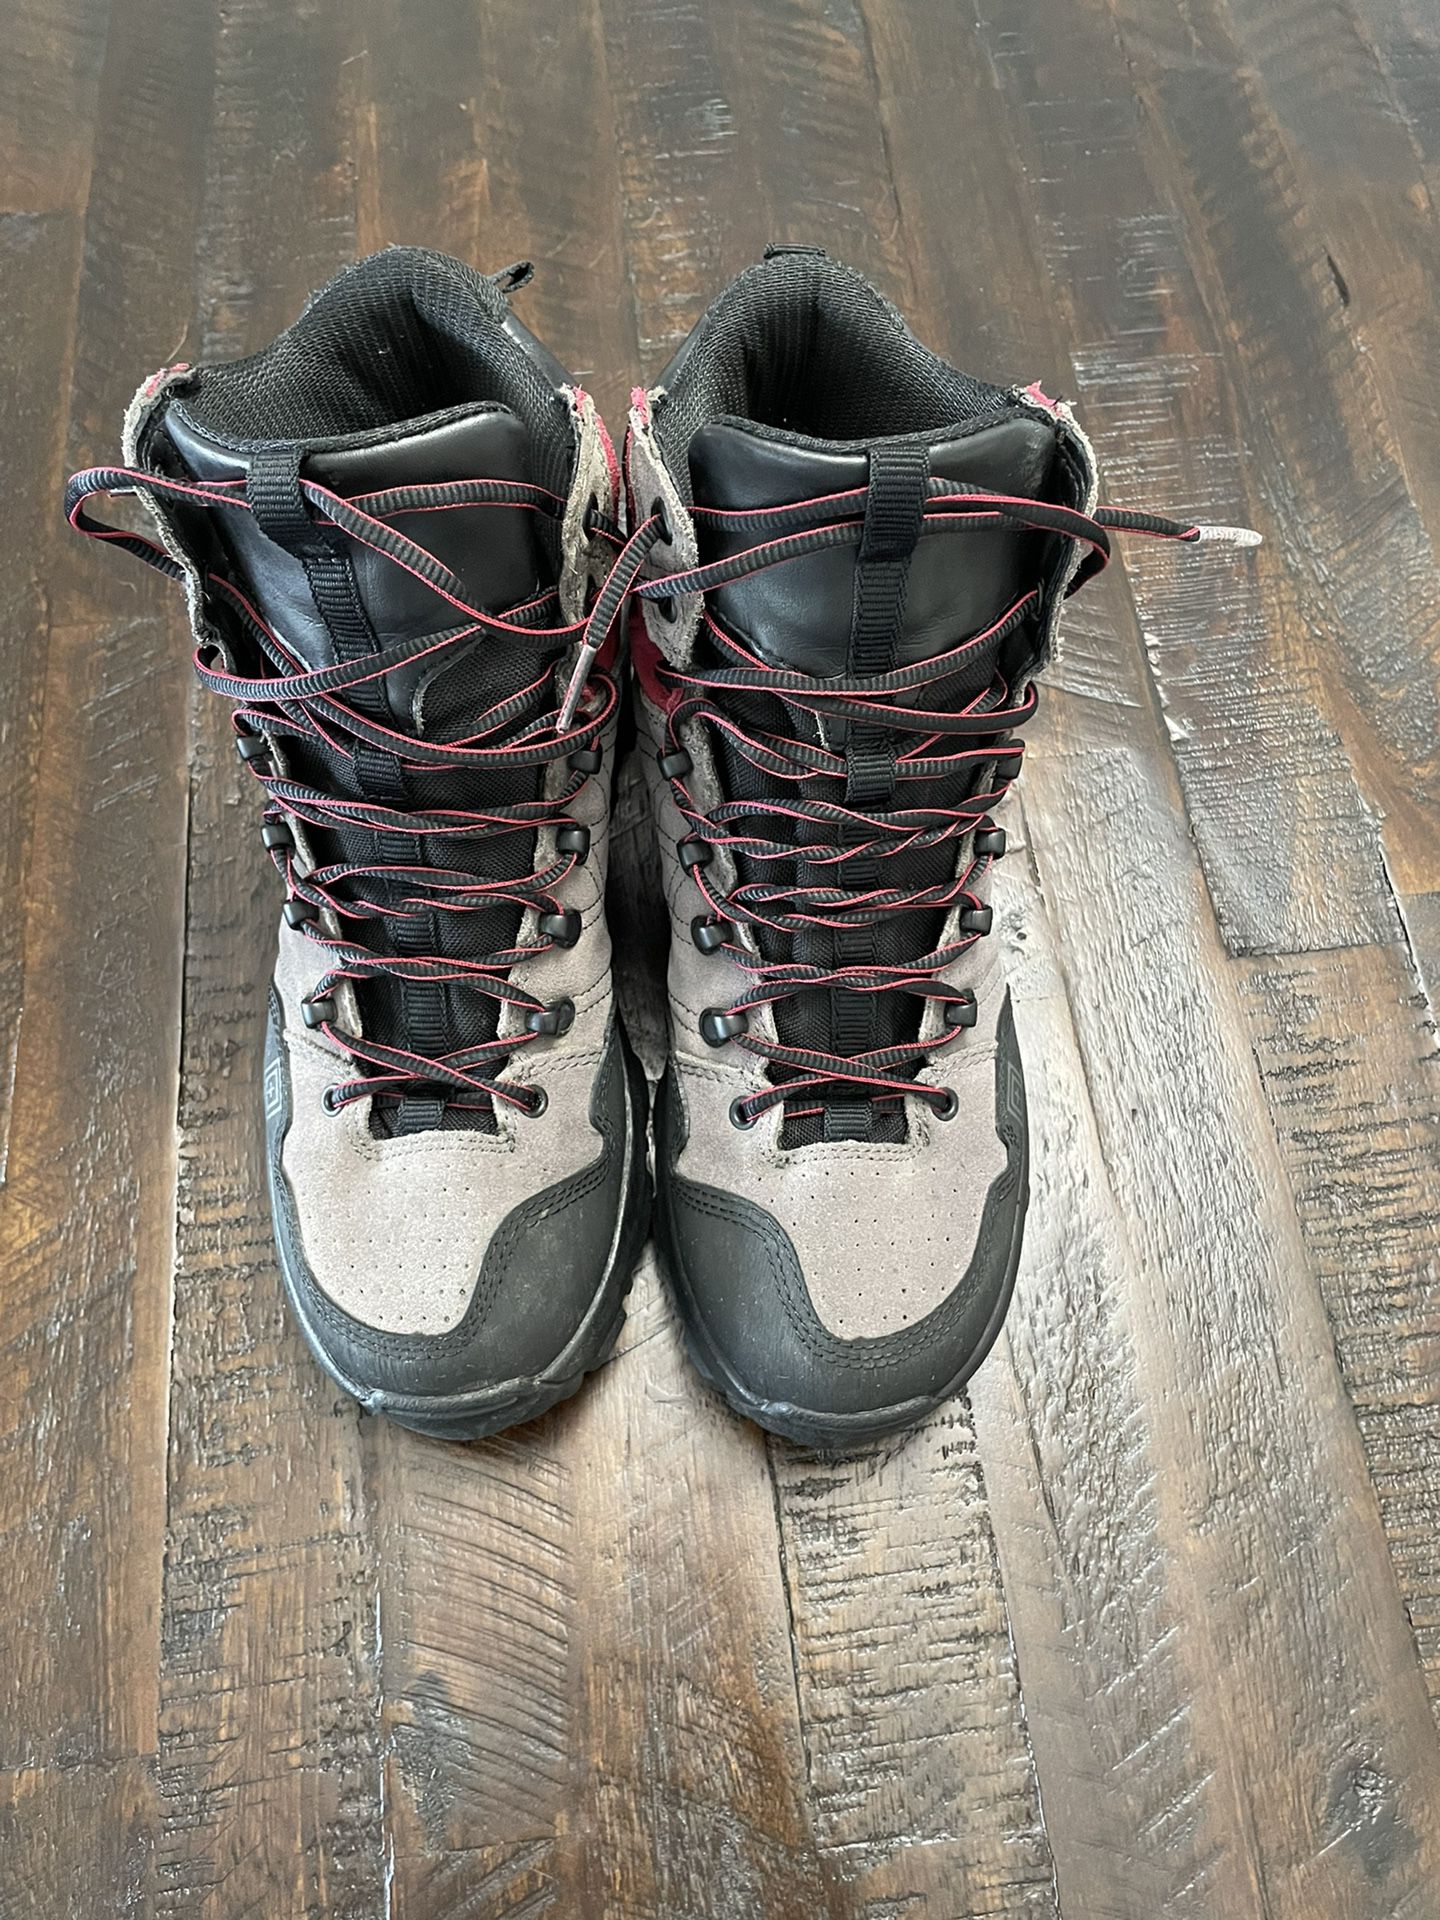 5.11 Tactical Hiking/Work Boots Men's Size 9D